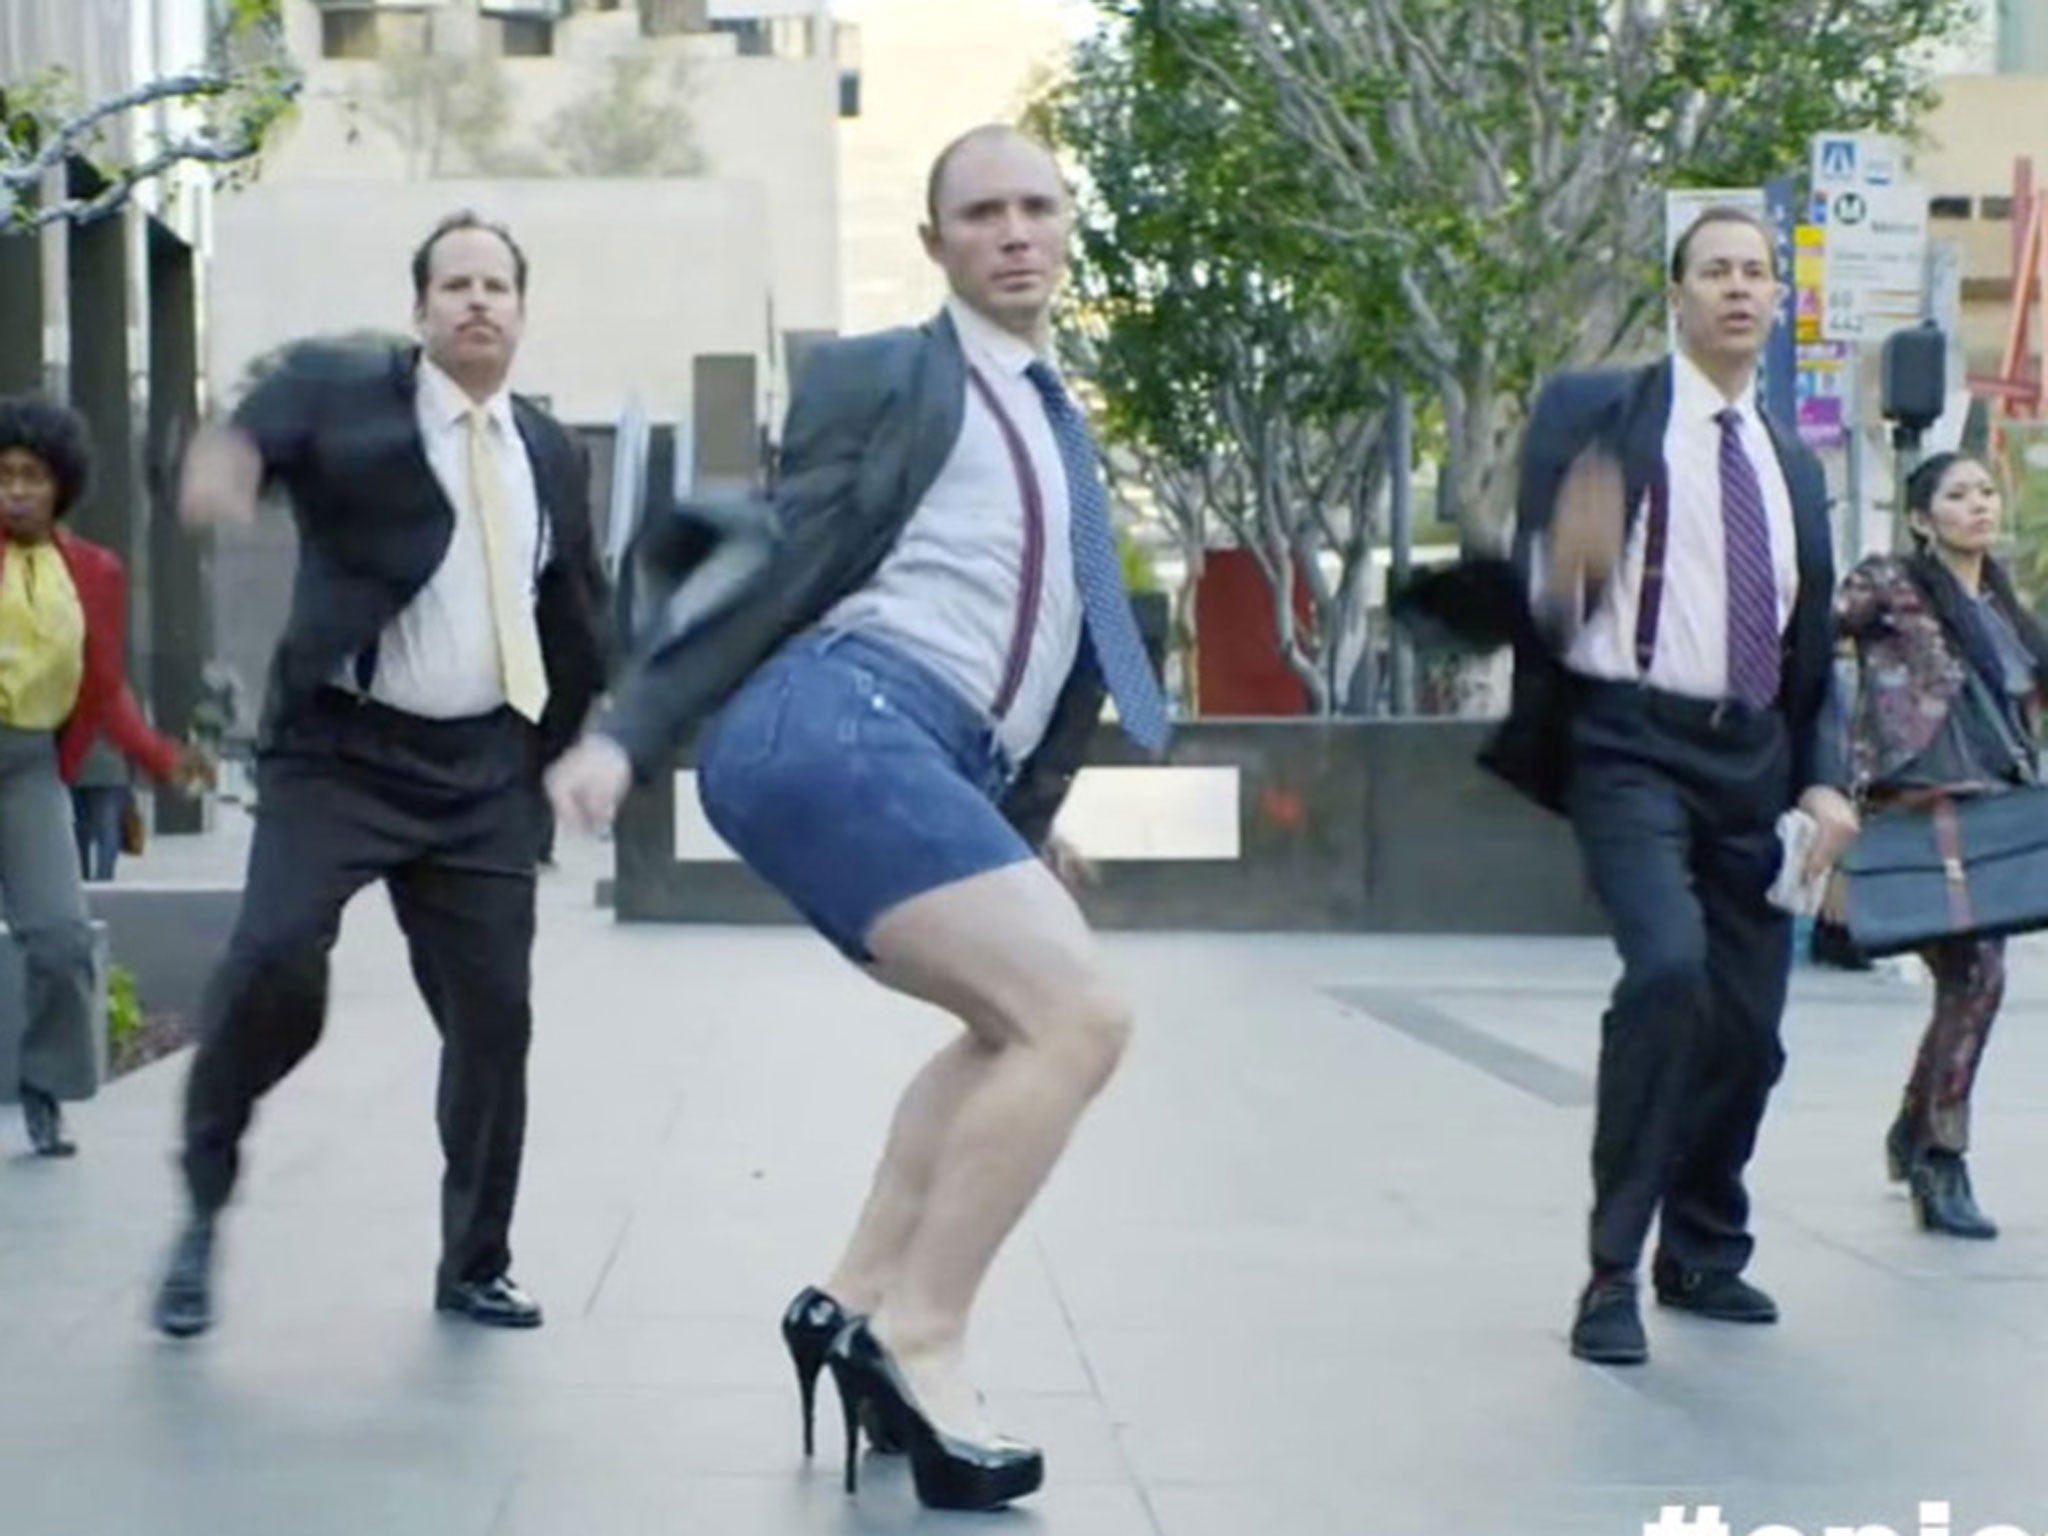 MoneySuperMarket's 'dance off' advert drew 455 complaints, more than any other advert between January and June this year